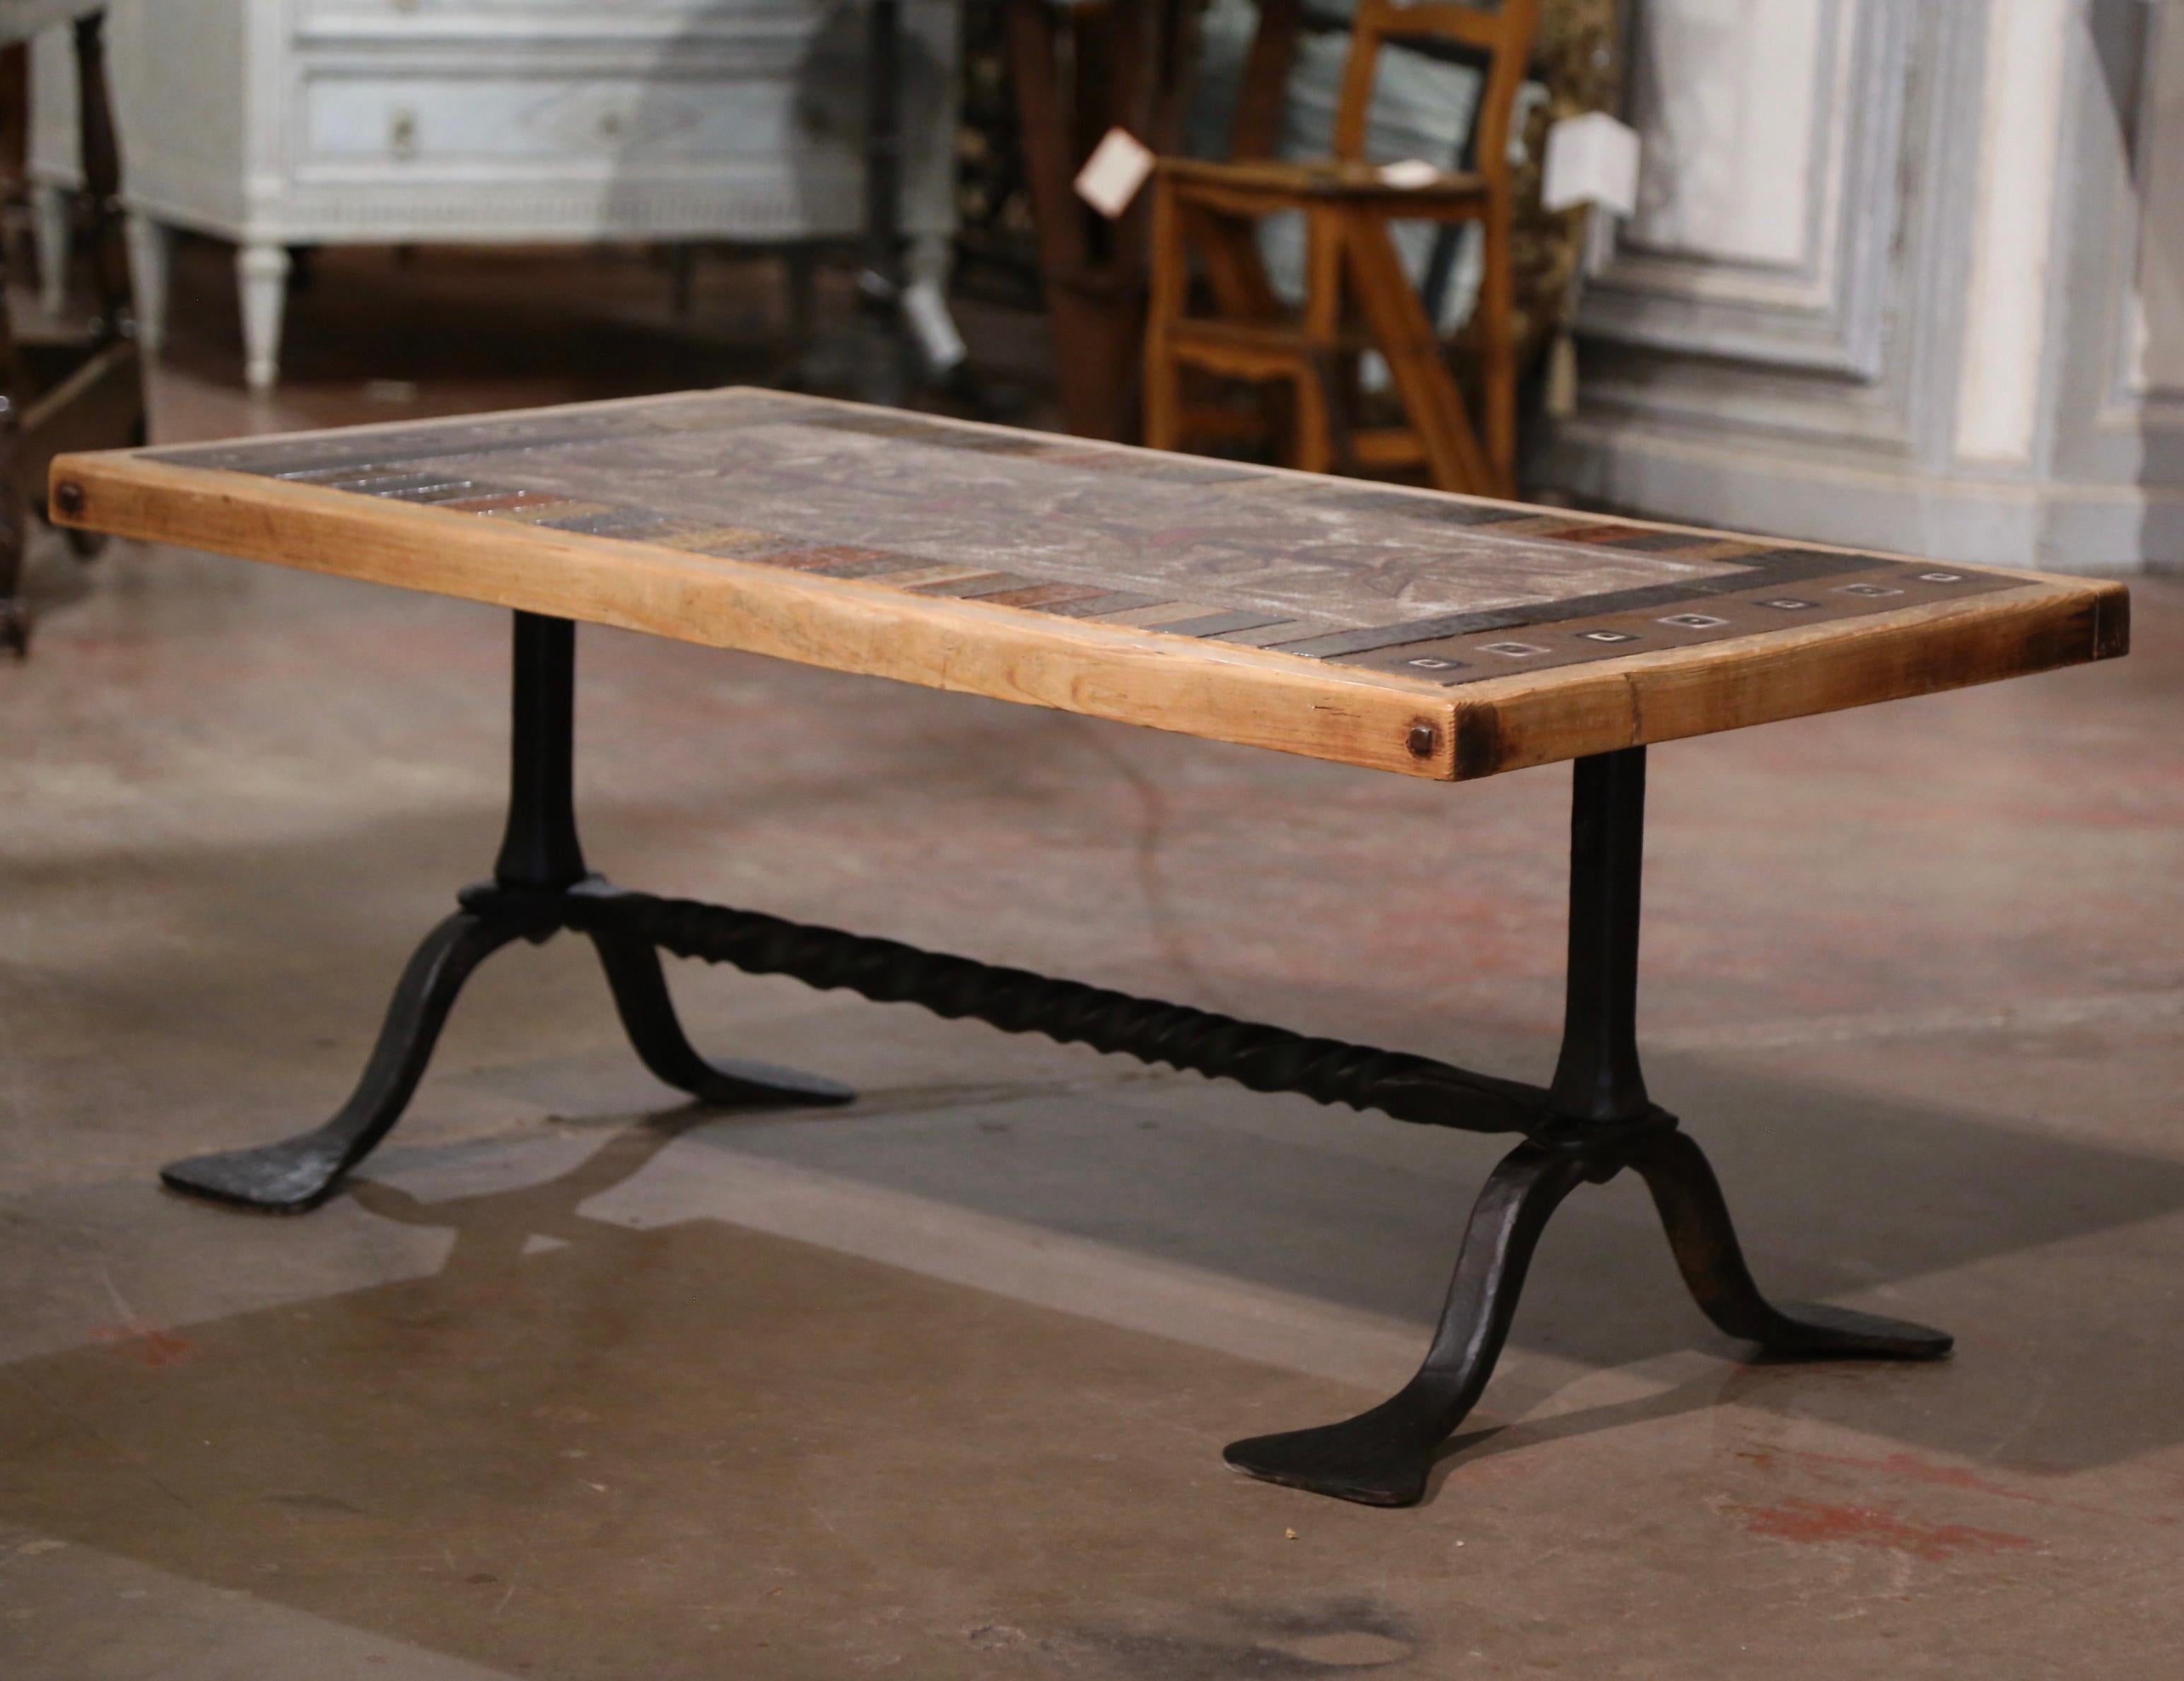 Decorate a den or a living room with this elegant antique cocktail table. Crafted in Vallauris, southern France circa 1950, the low table stands on a forged wrought iron trestle base. The rectangular top, signed by the artist J.G. Picard, is built